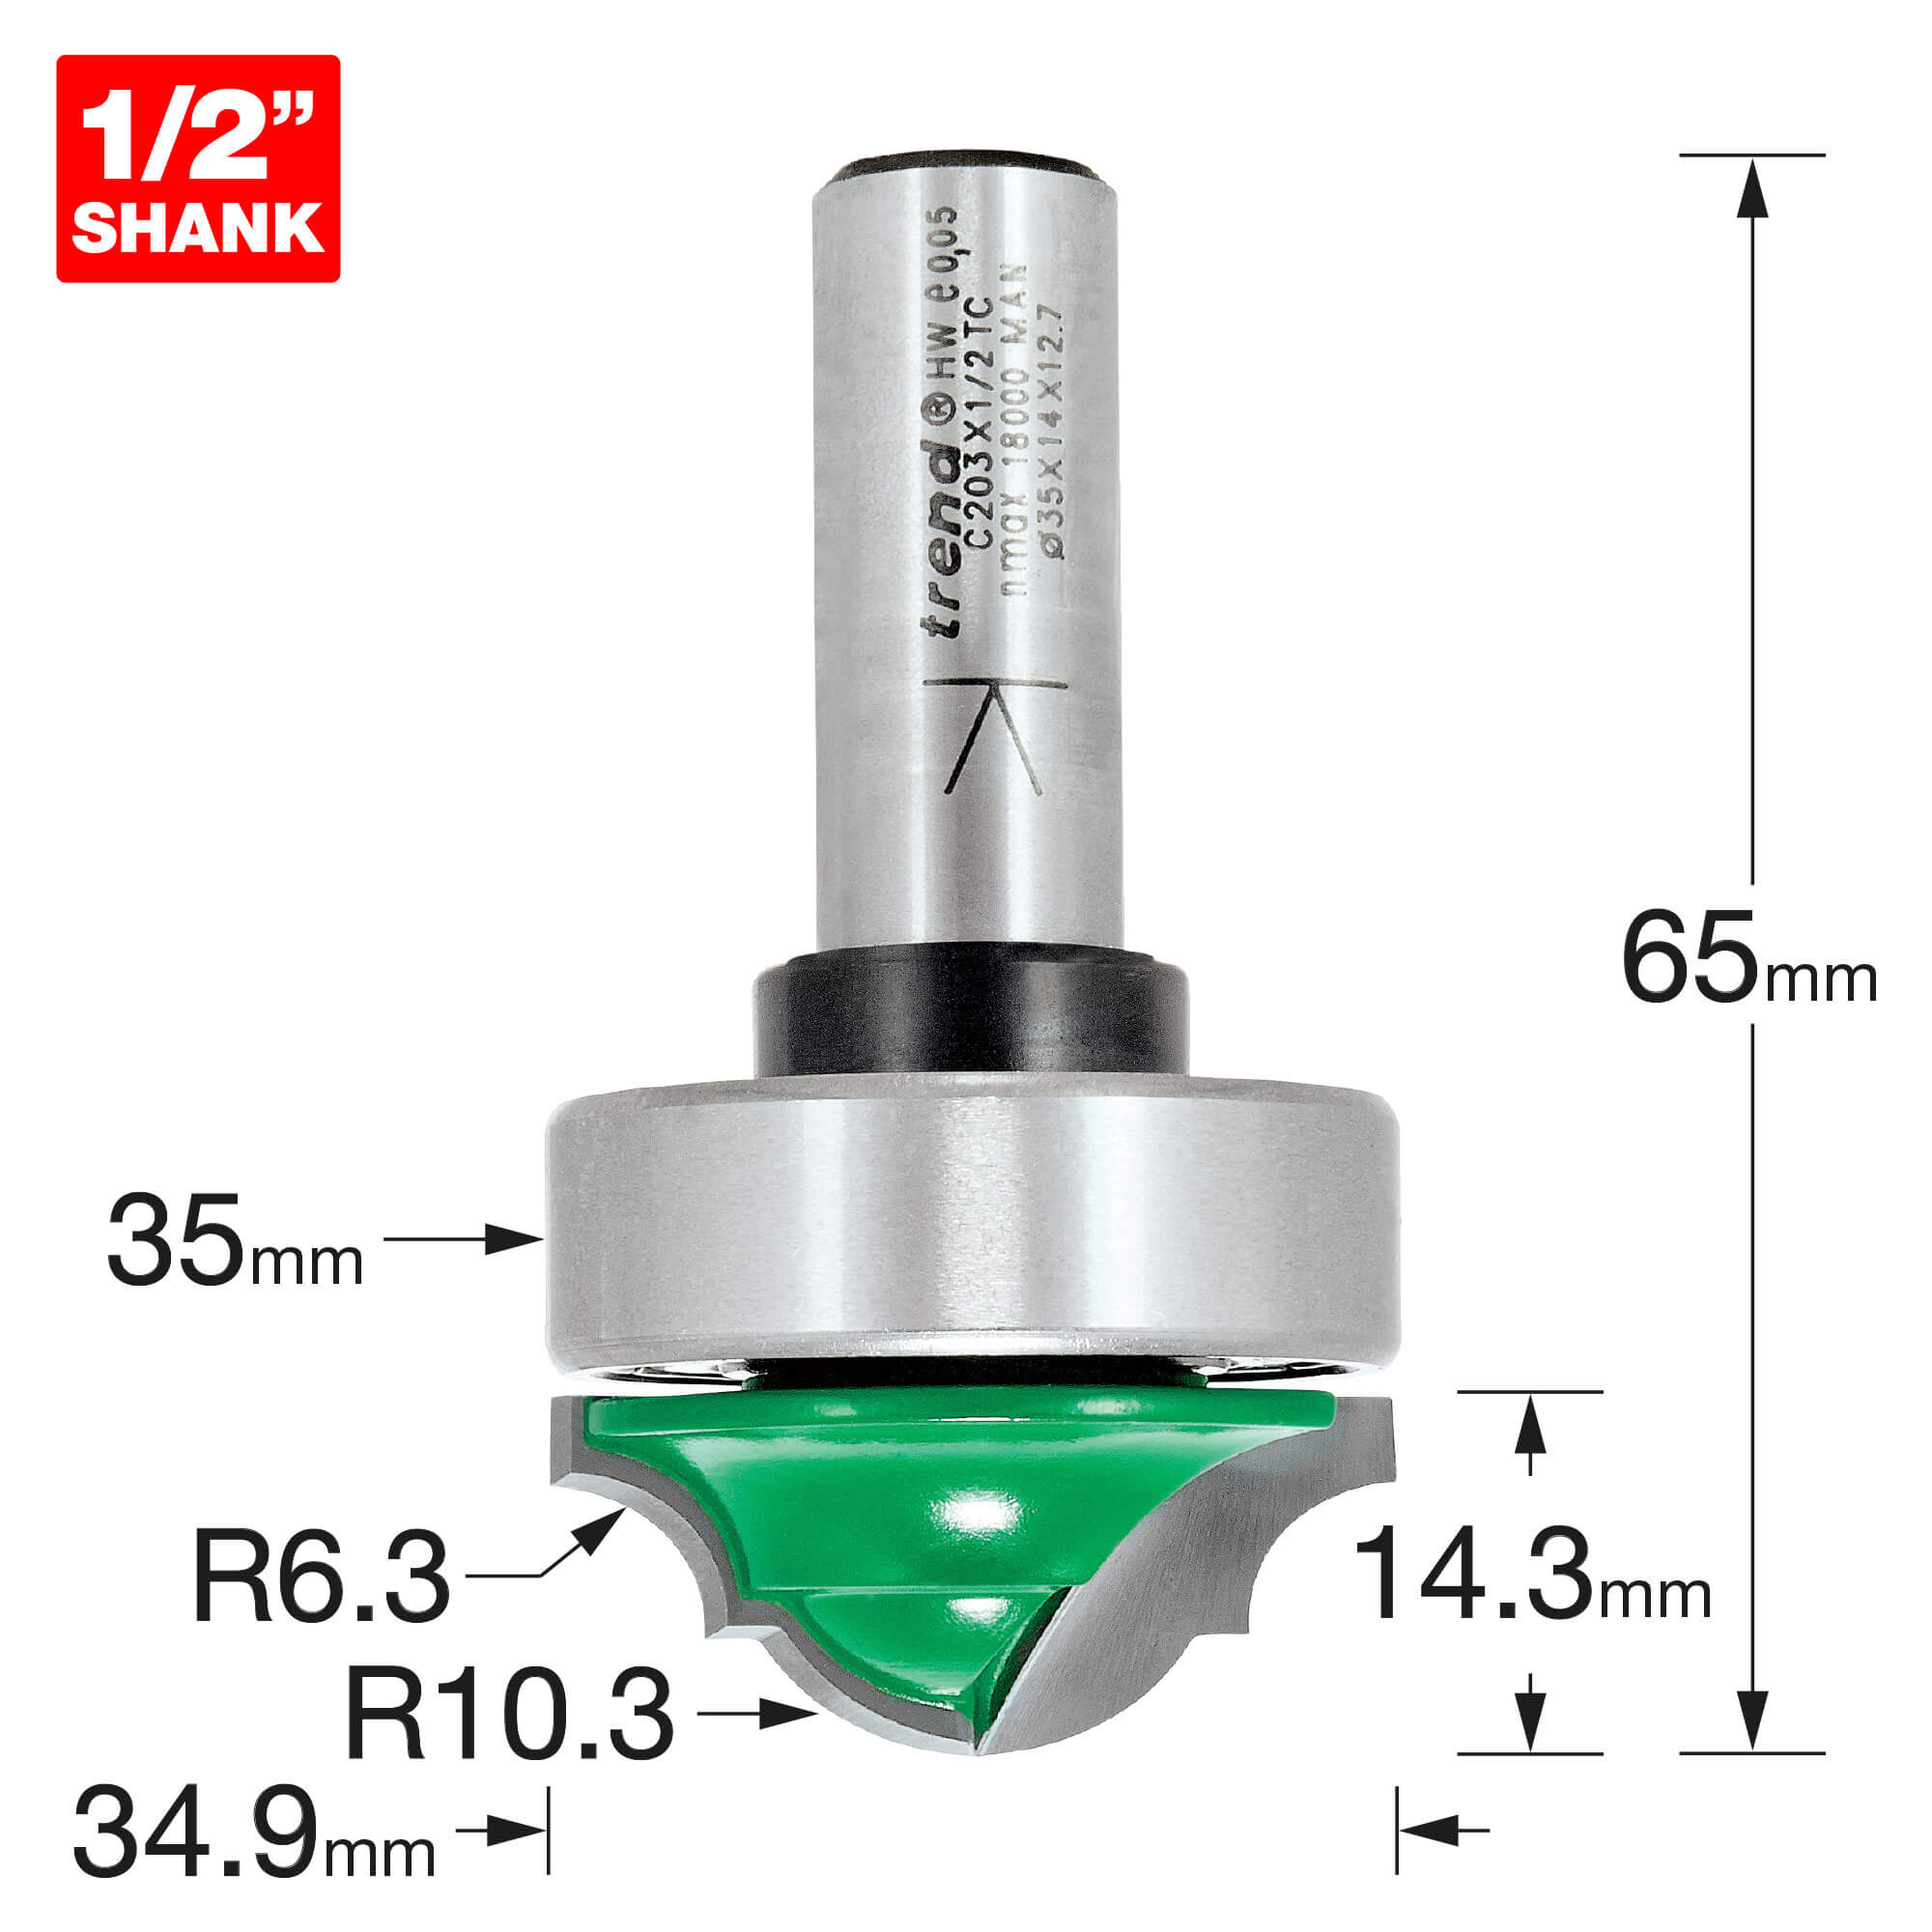 Image of Trend CRAFTPRO Bearing Guided Classic Decor Router Cutter 35mm 14.3mm 1/2"